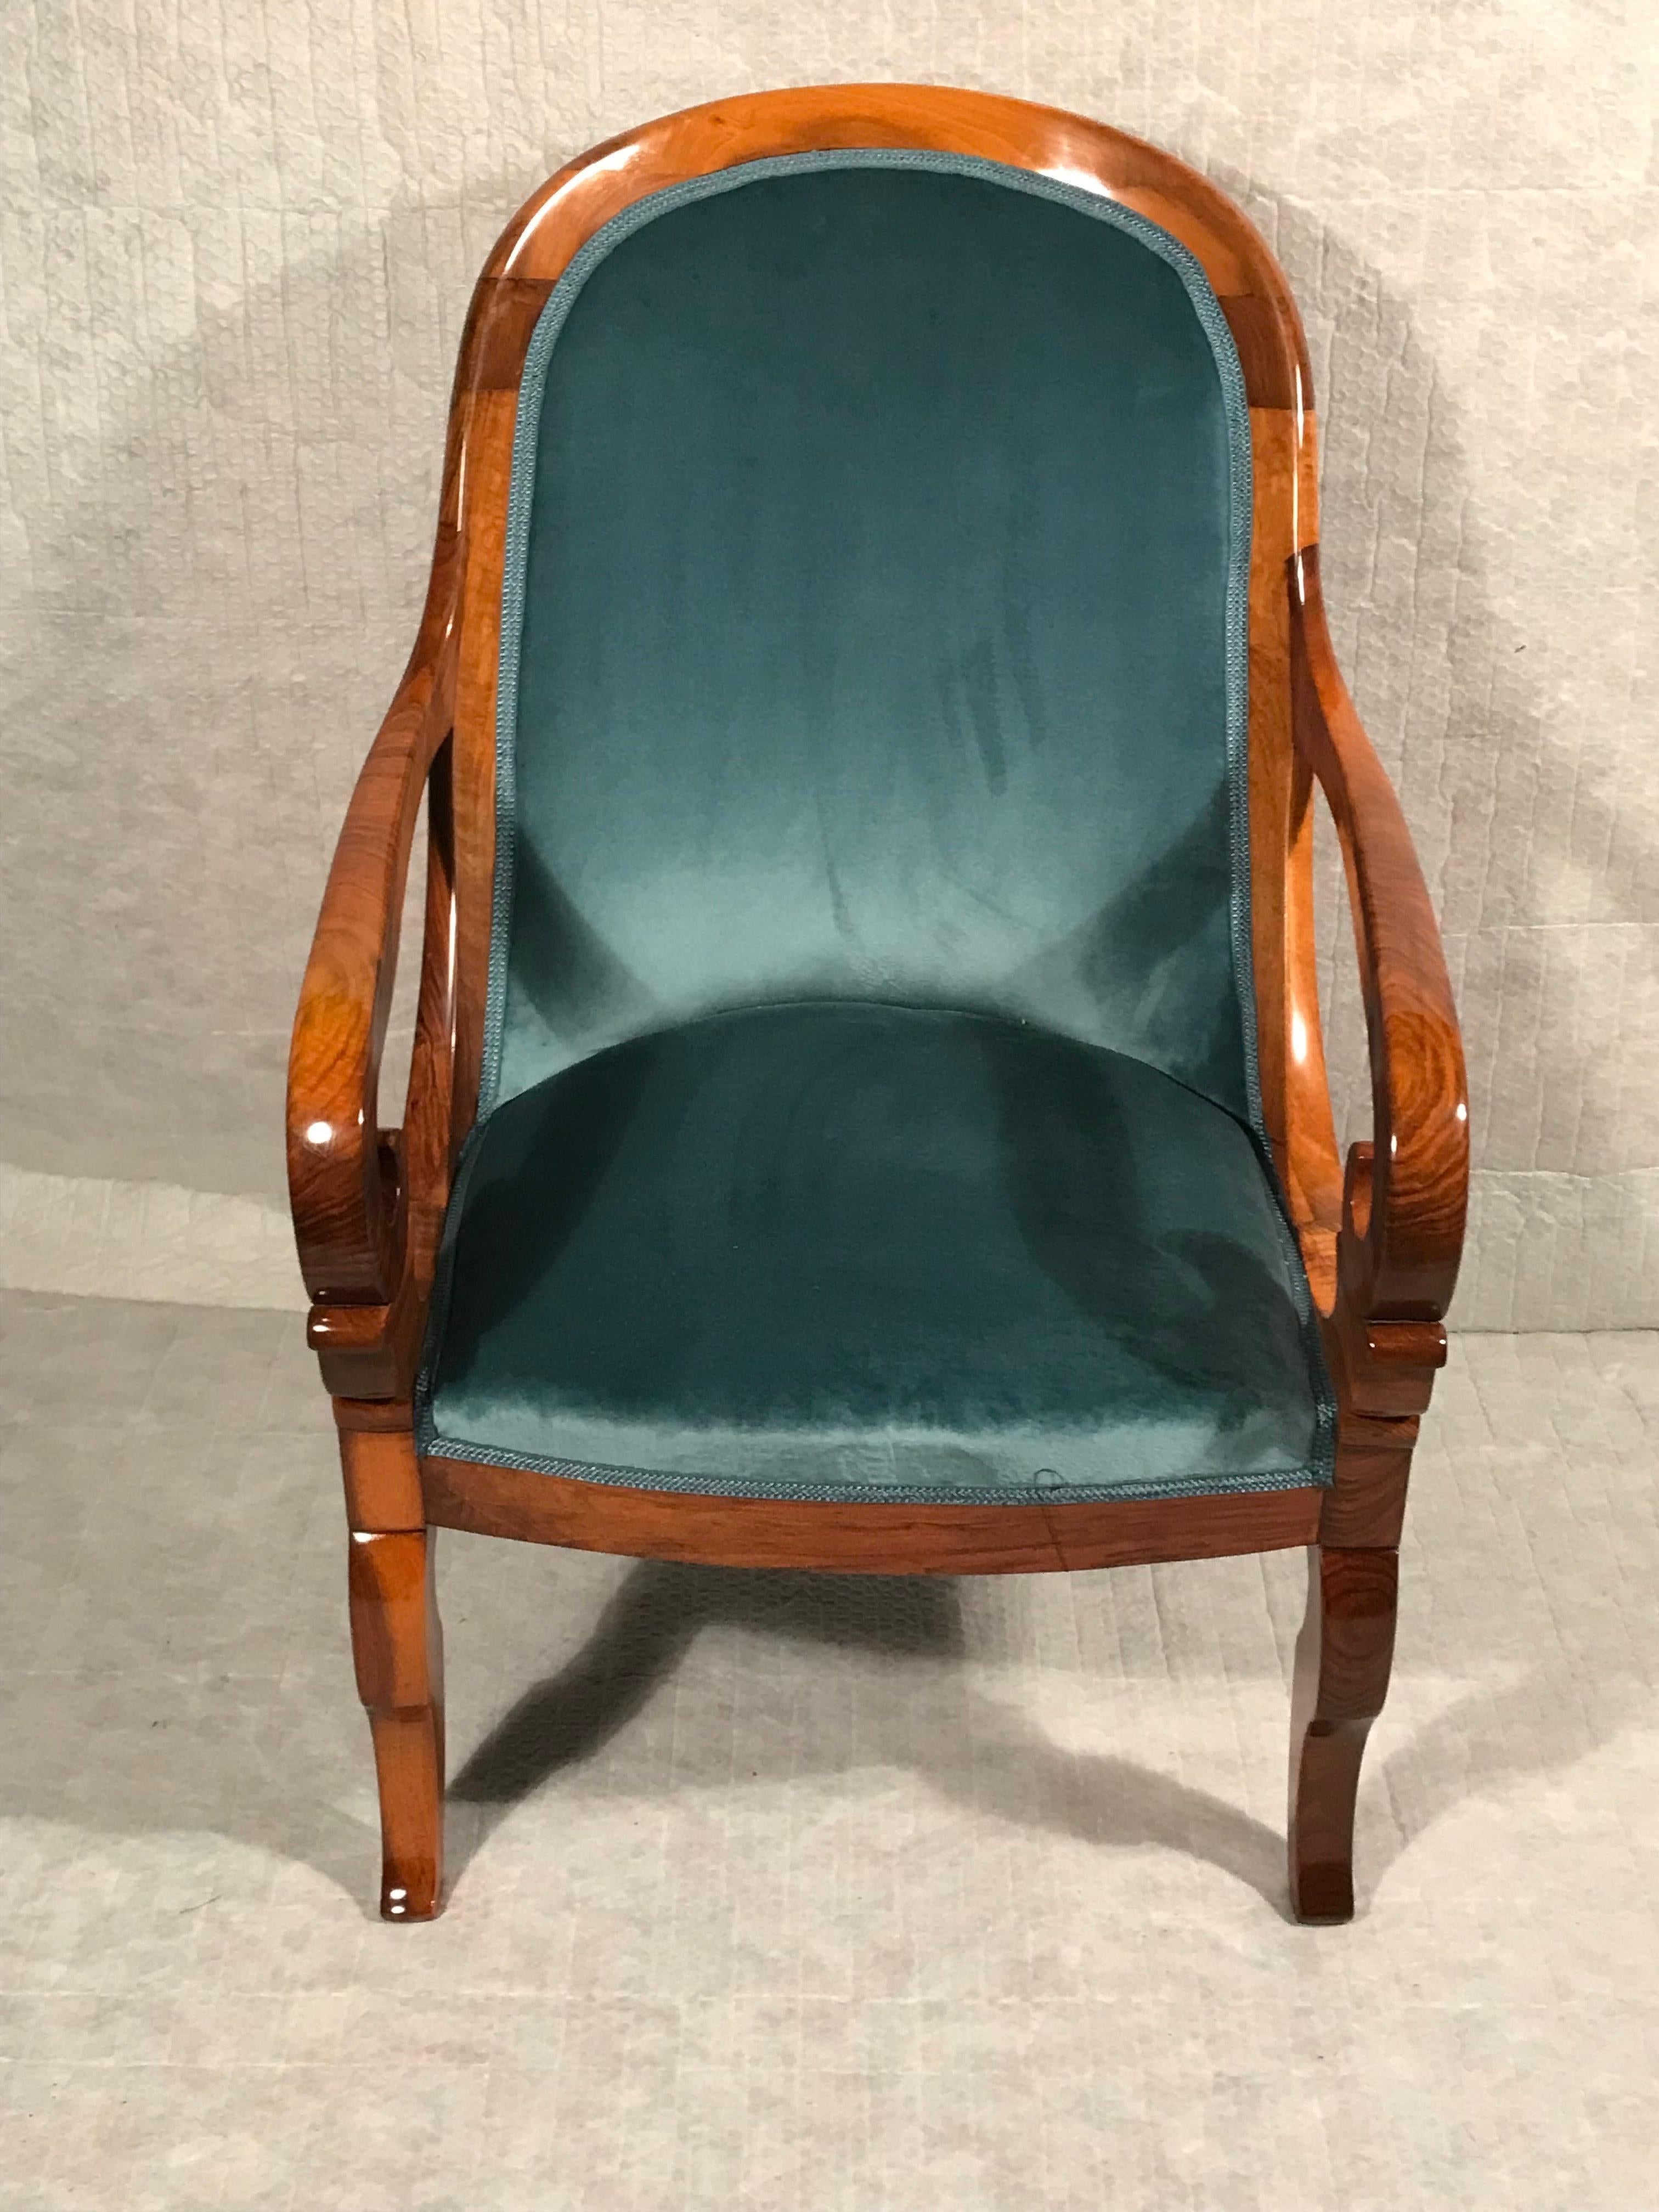 Biedermeier armchair, South West Germany, 1820. 
This very comfortable original Biedermeier armchair or bergère comes from south west Germany. It shows the influence from the French Restoration Style. 
(1814-30). The armchair has beautifully curved